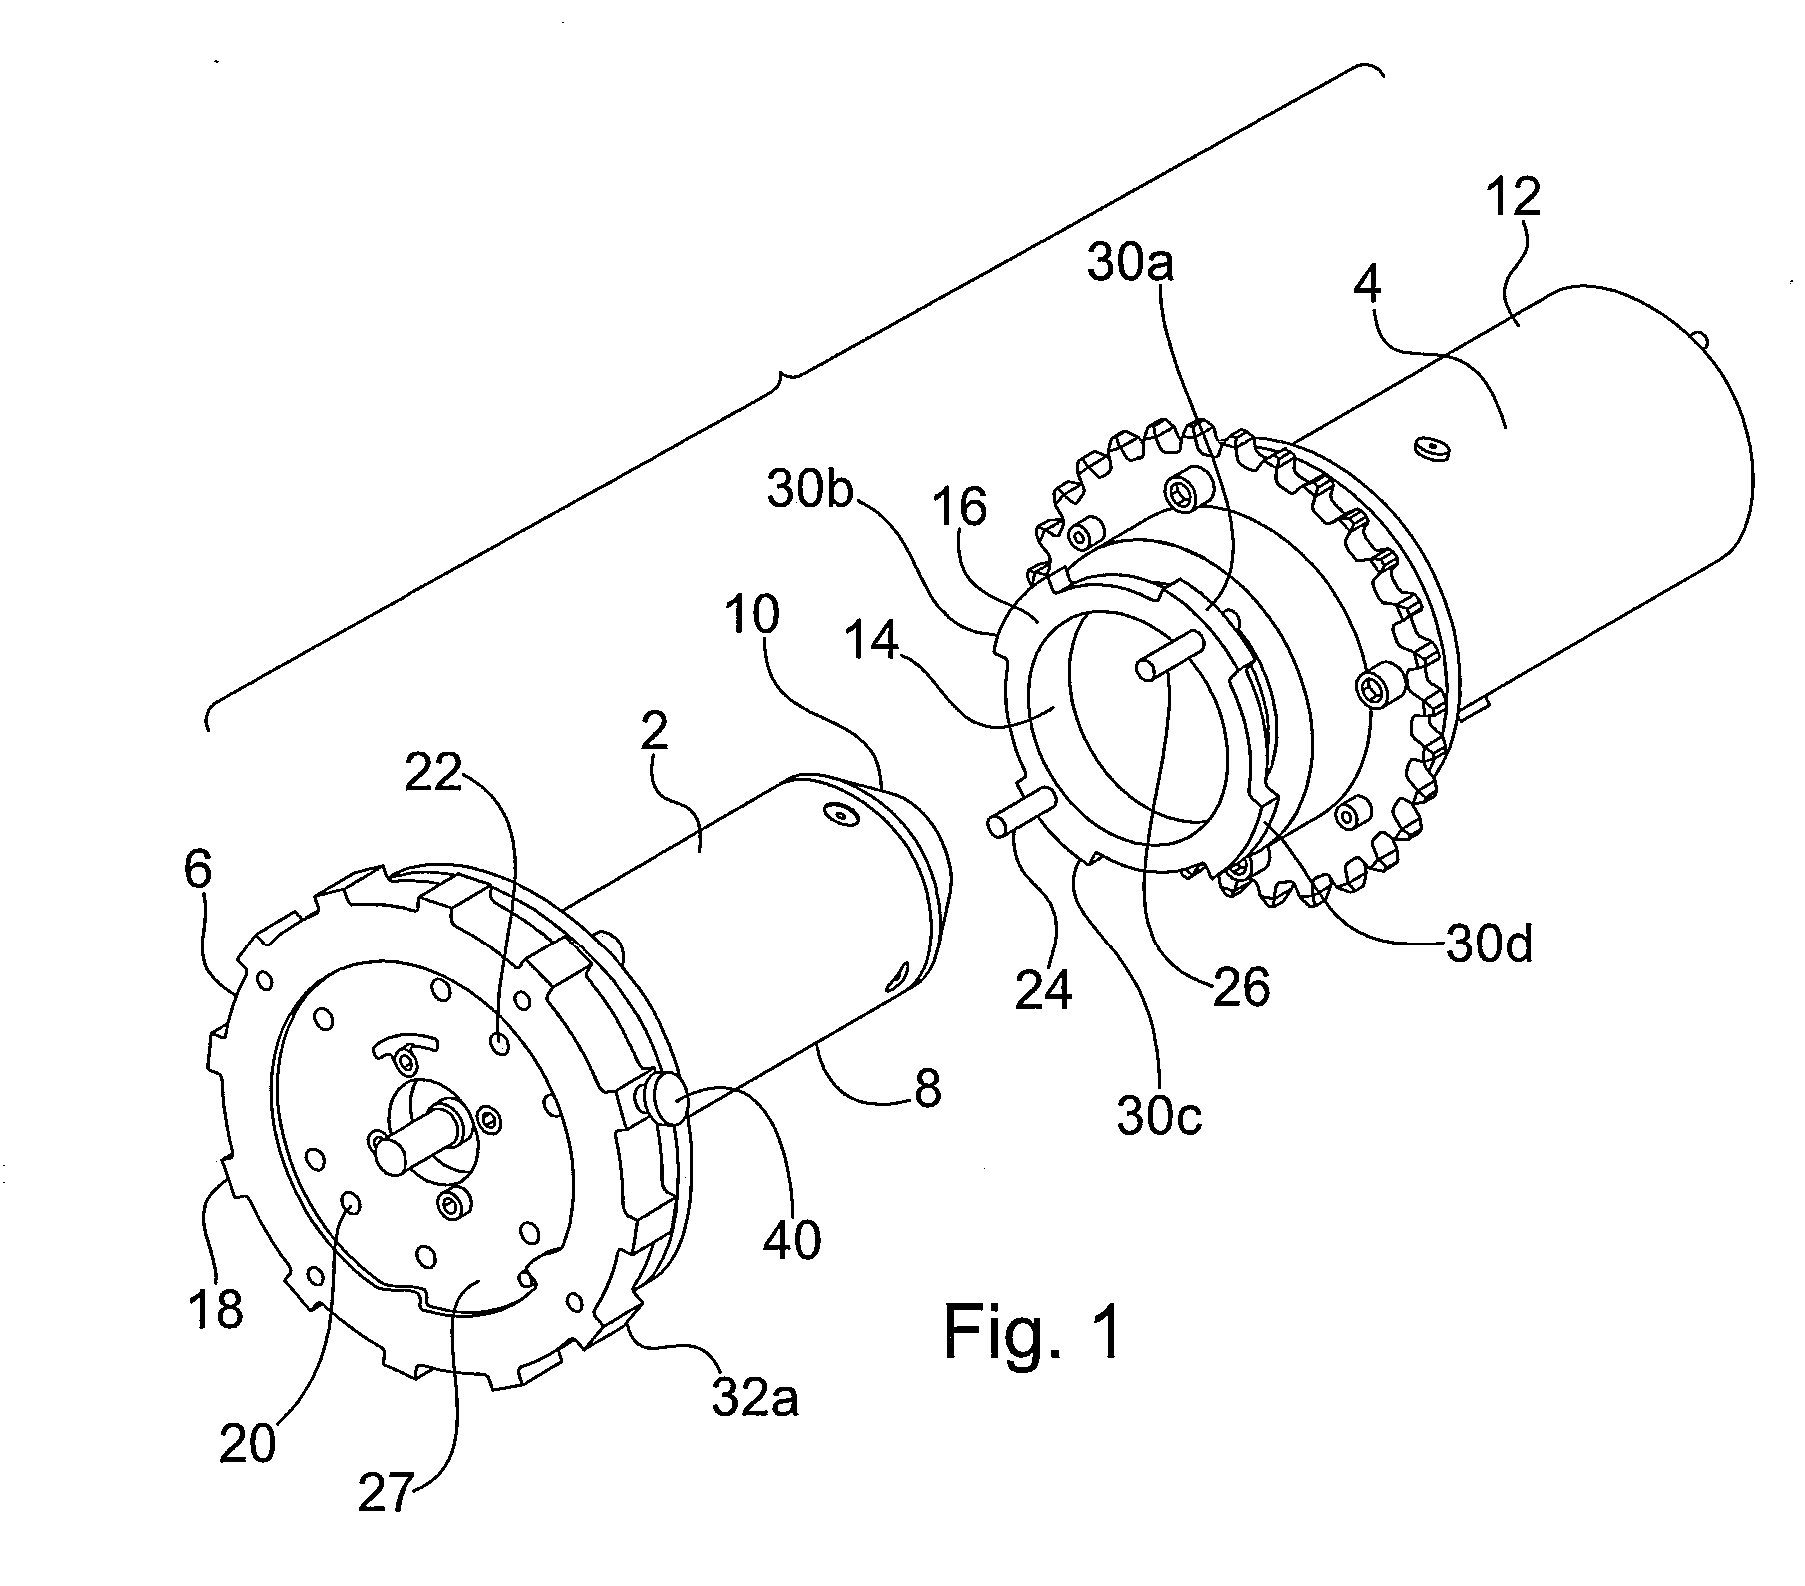 Robust Manual Connector for Robotic Arm End Effector